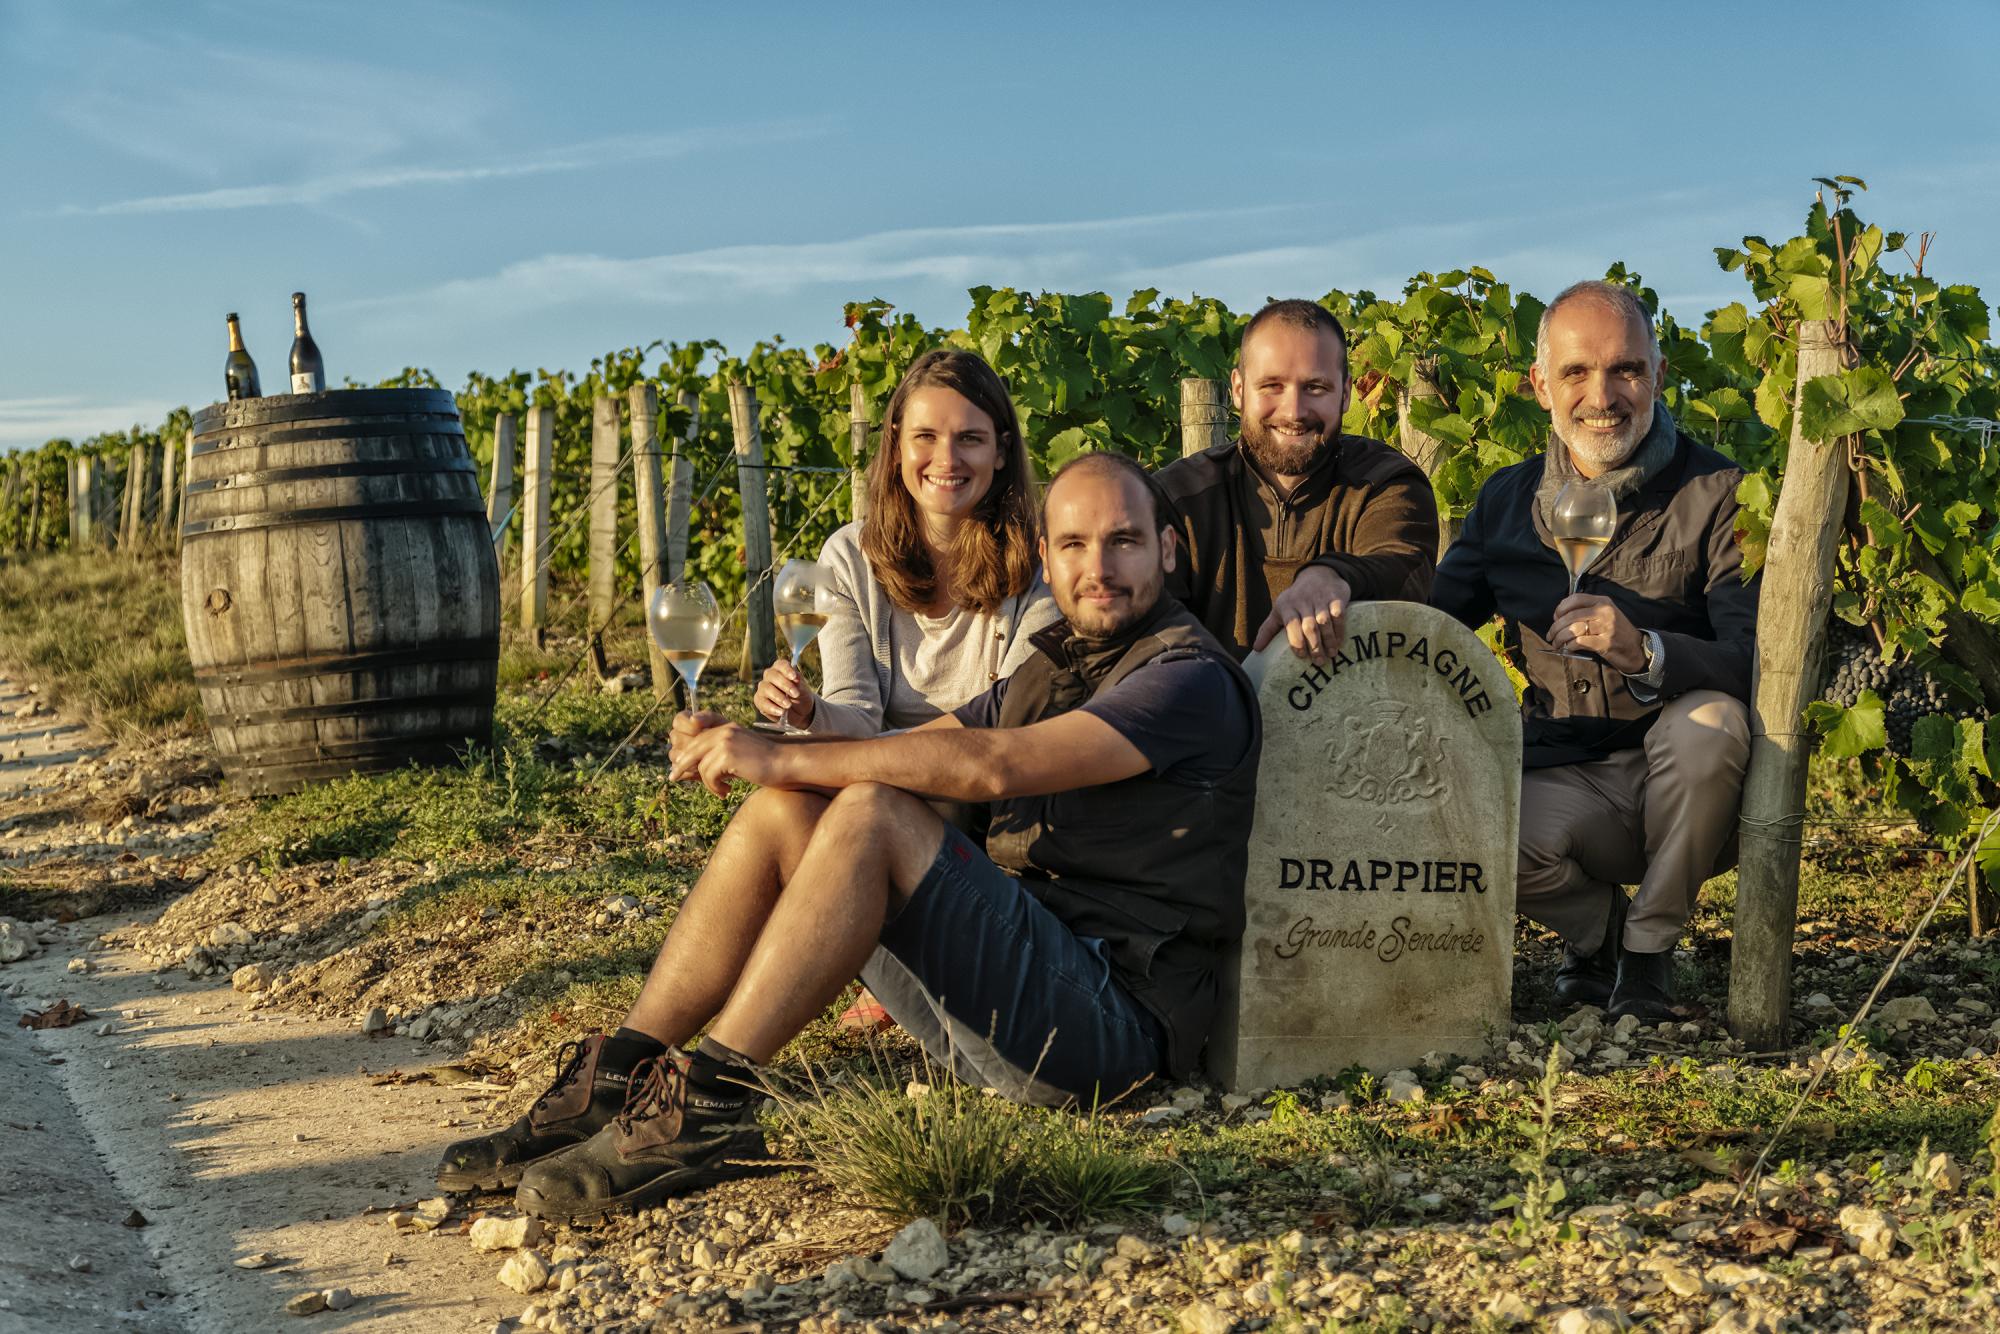 Drappier family in the vineyard